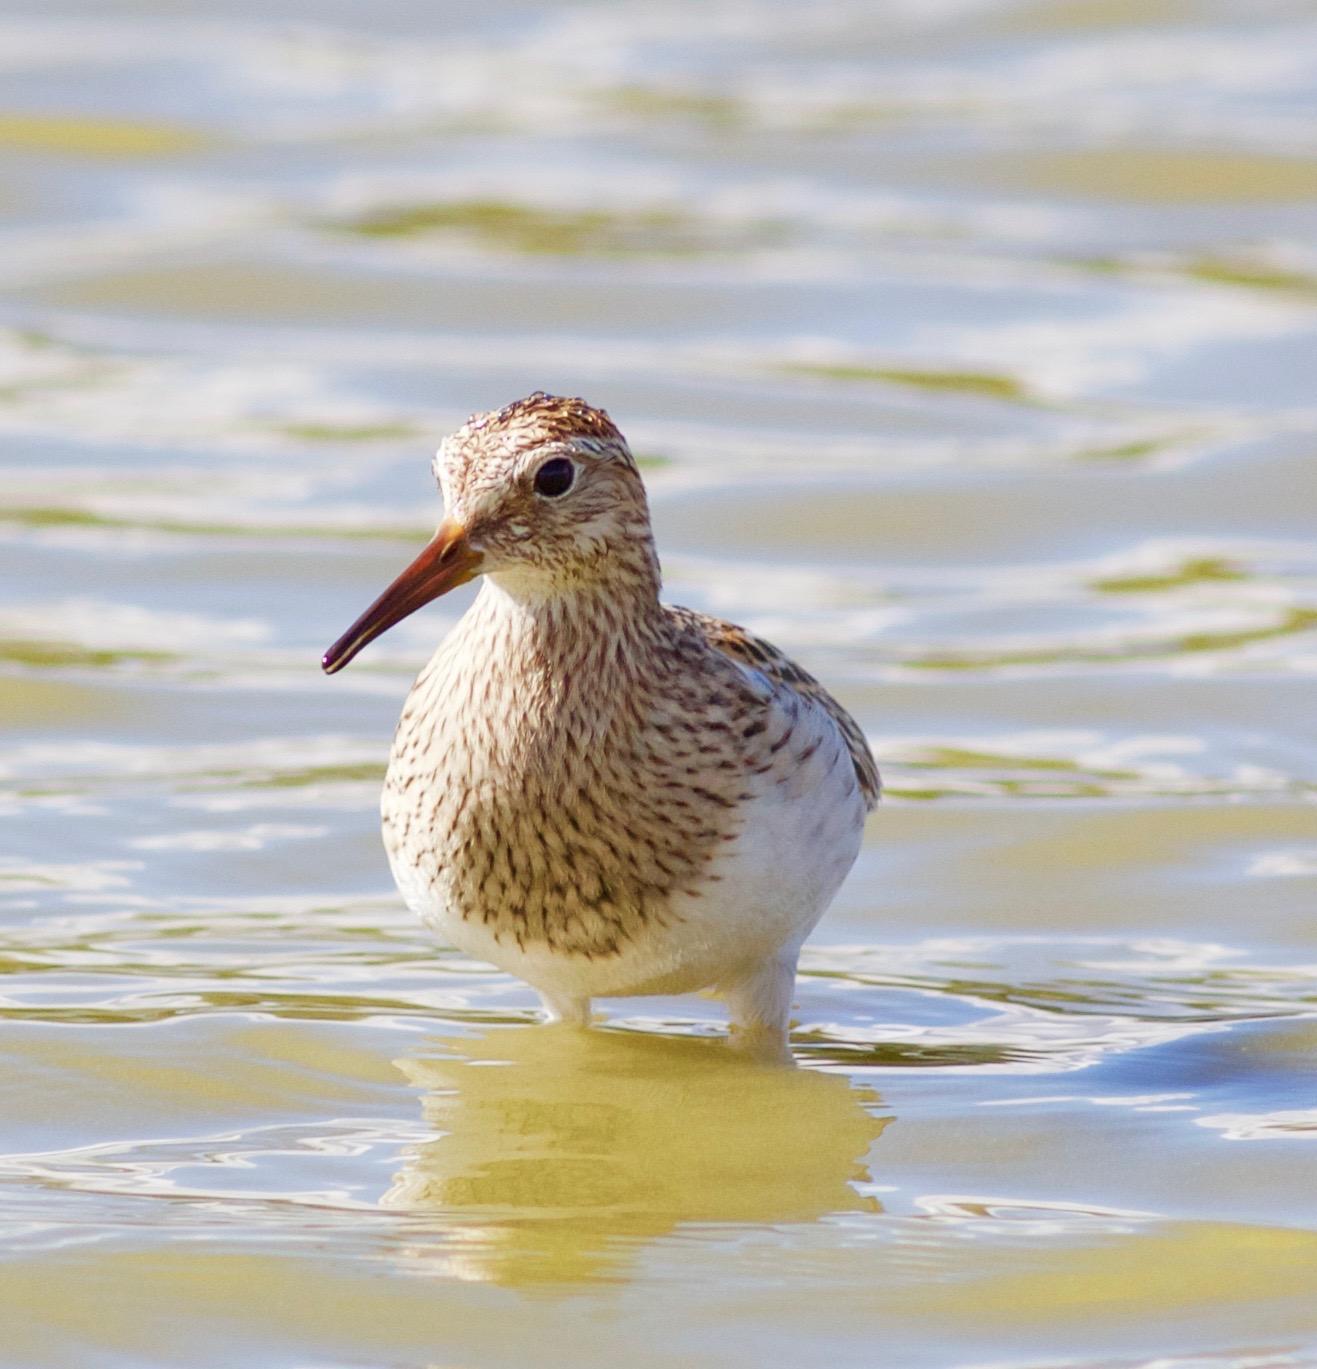 Pectoral Sandpiper Photo by Kathryn Keith